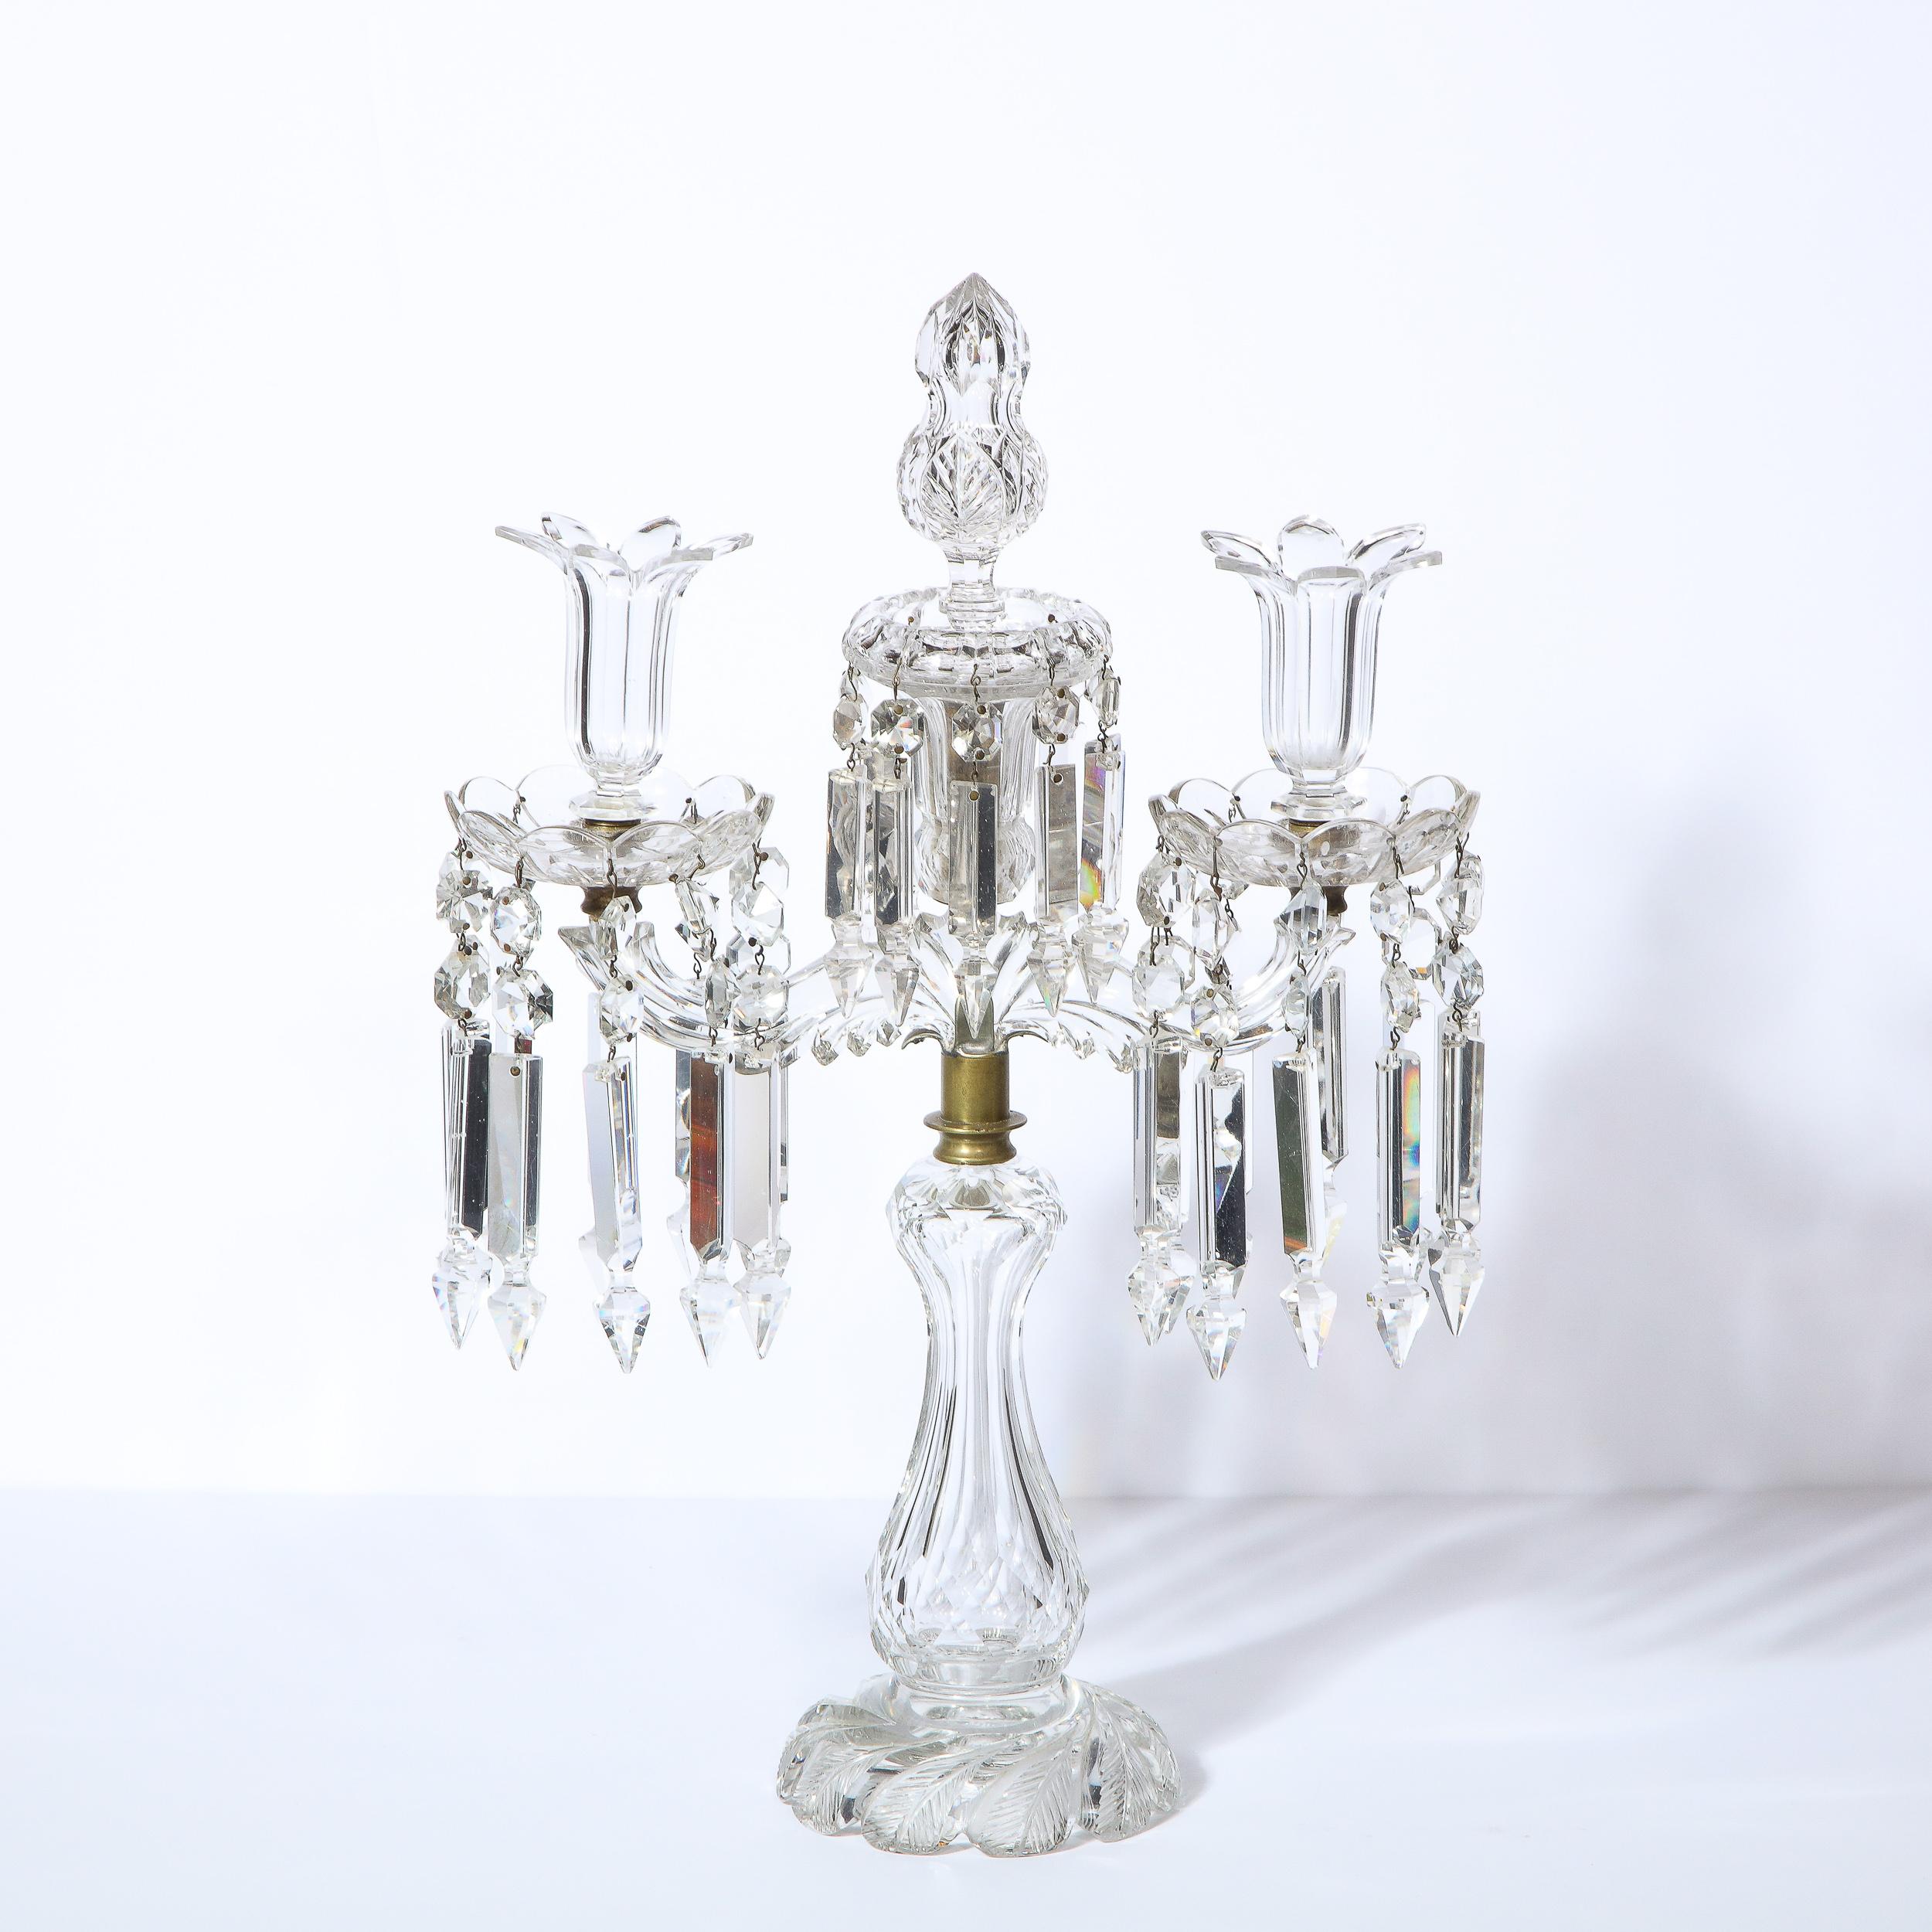 This glamorous 1940s Hollywood Regency girandole/ candelabra was realized in the United States circa 1940. It features a circular channeled base with foliate engravings that ascends into an undulating body with diamond forms faceted into the glass.